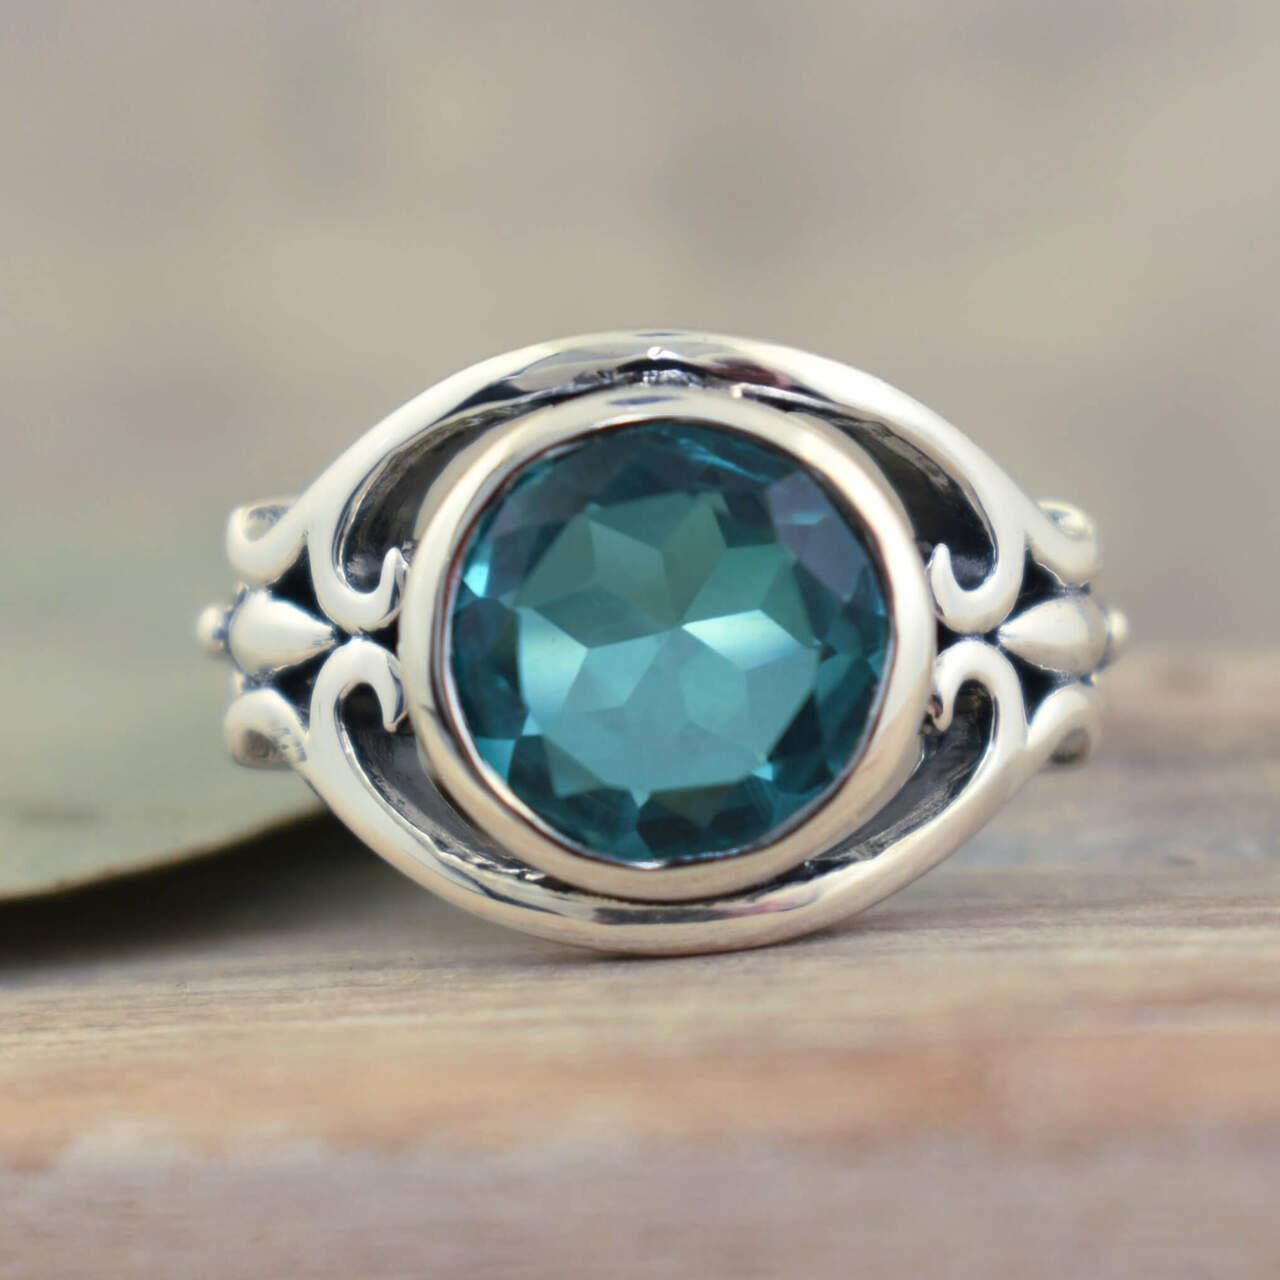 Handcrafted sterling silver ring with large doublet quartz stone